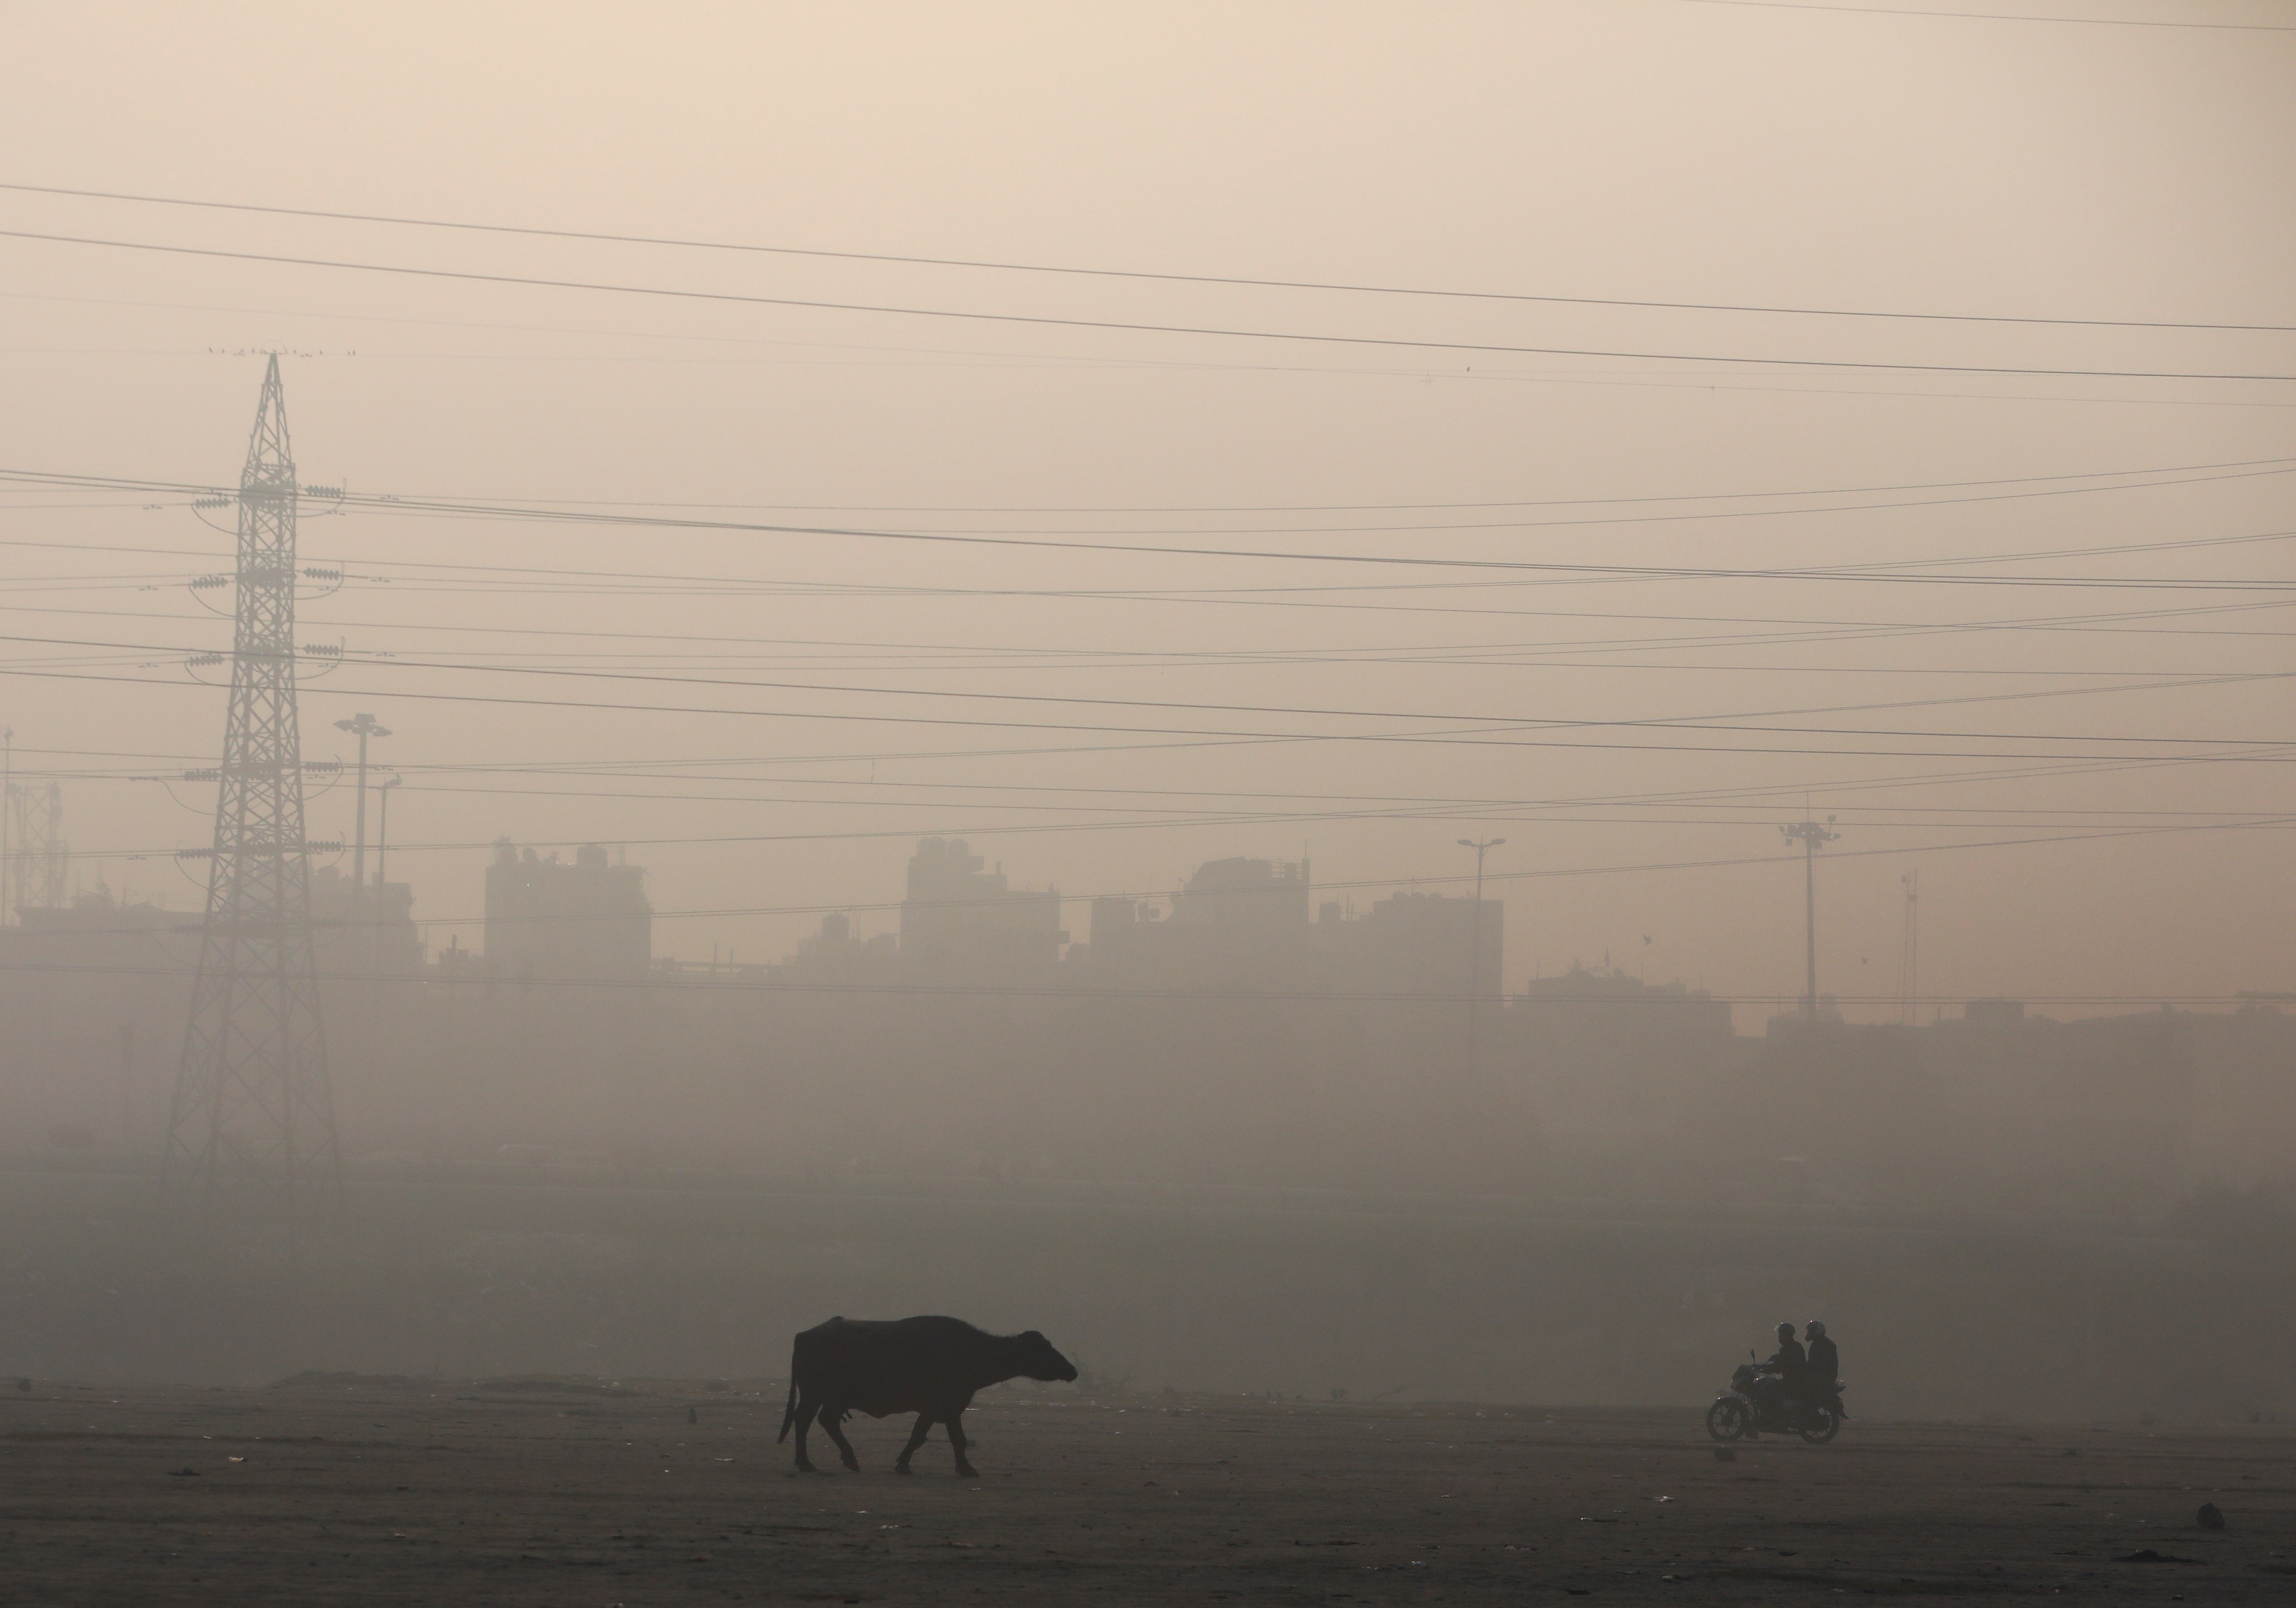 A motorbike rides on the floodplains of the Yamuna river on a smoggy morning in New Delhi